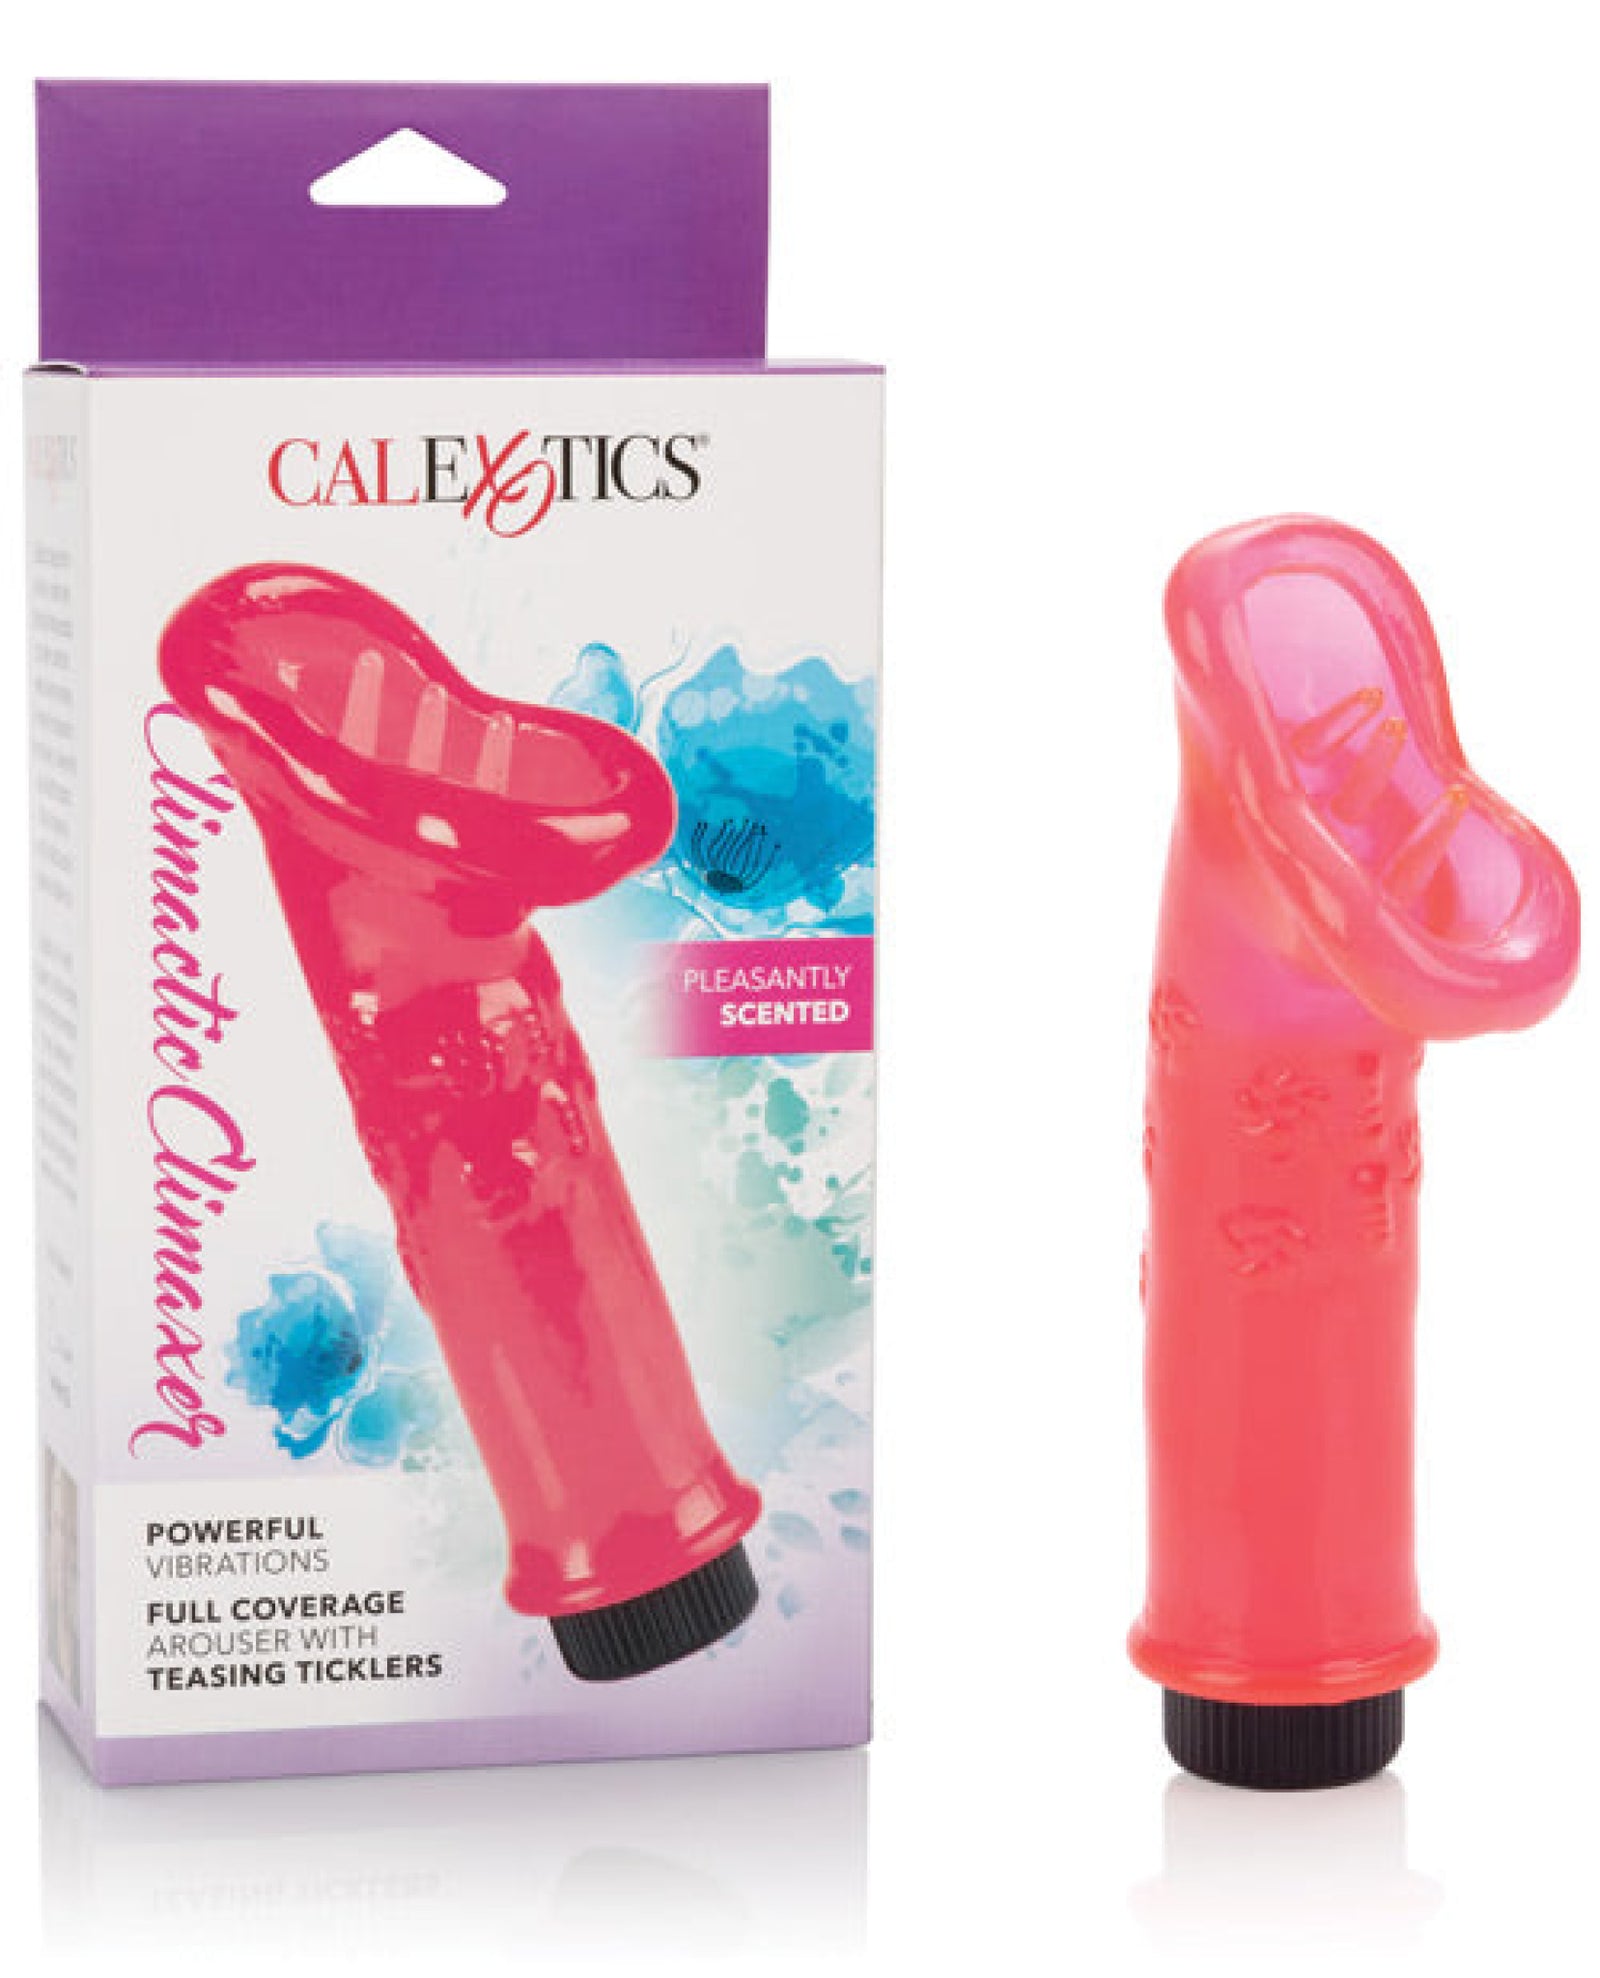 Climactic Climaxer - Red California Exotic Novelties